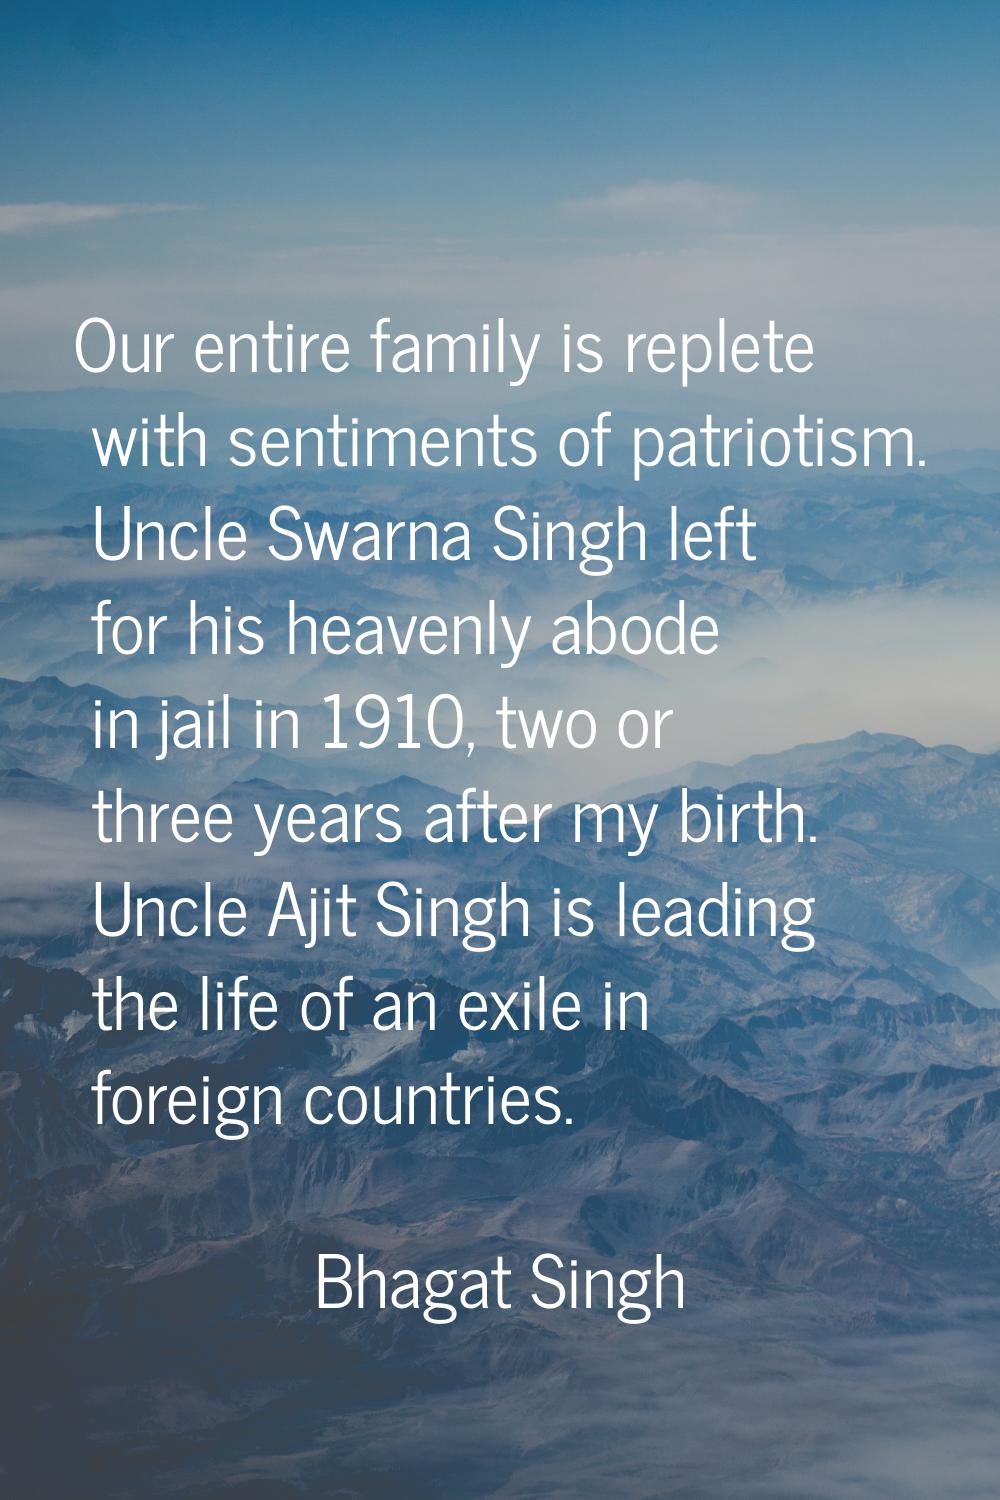 Our entire family is replete with sentiments of patriotism. Uncle Swarna Singh left for his heavenl